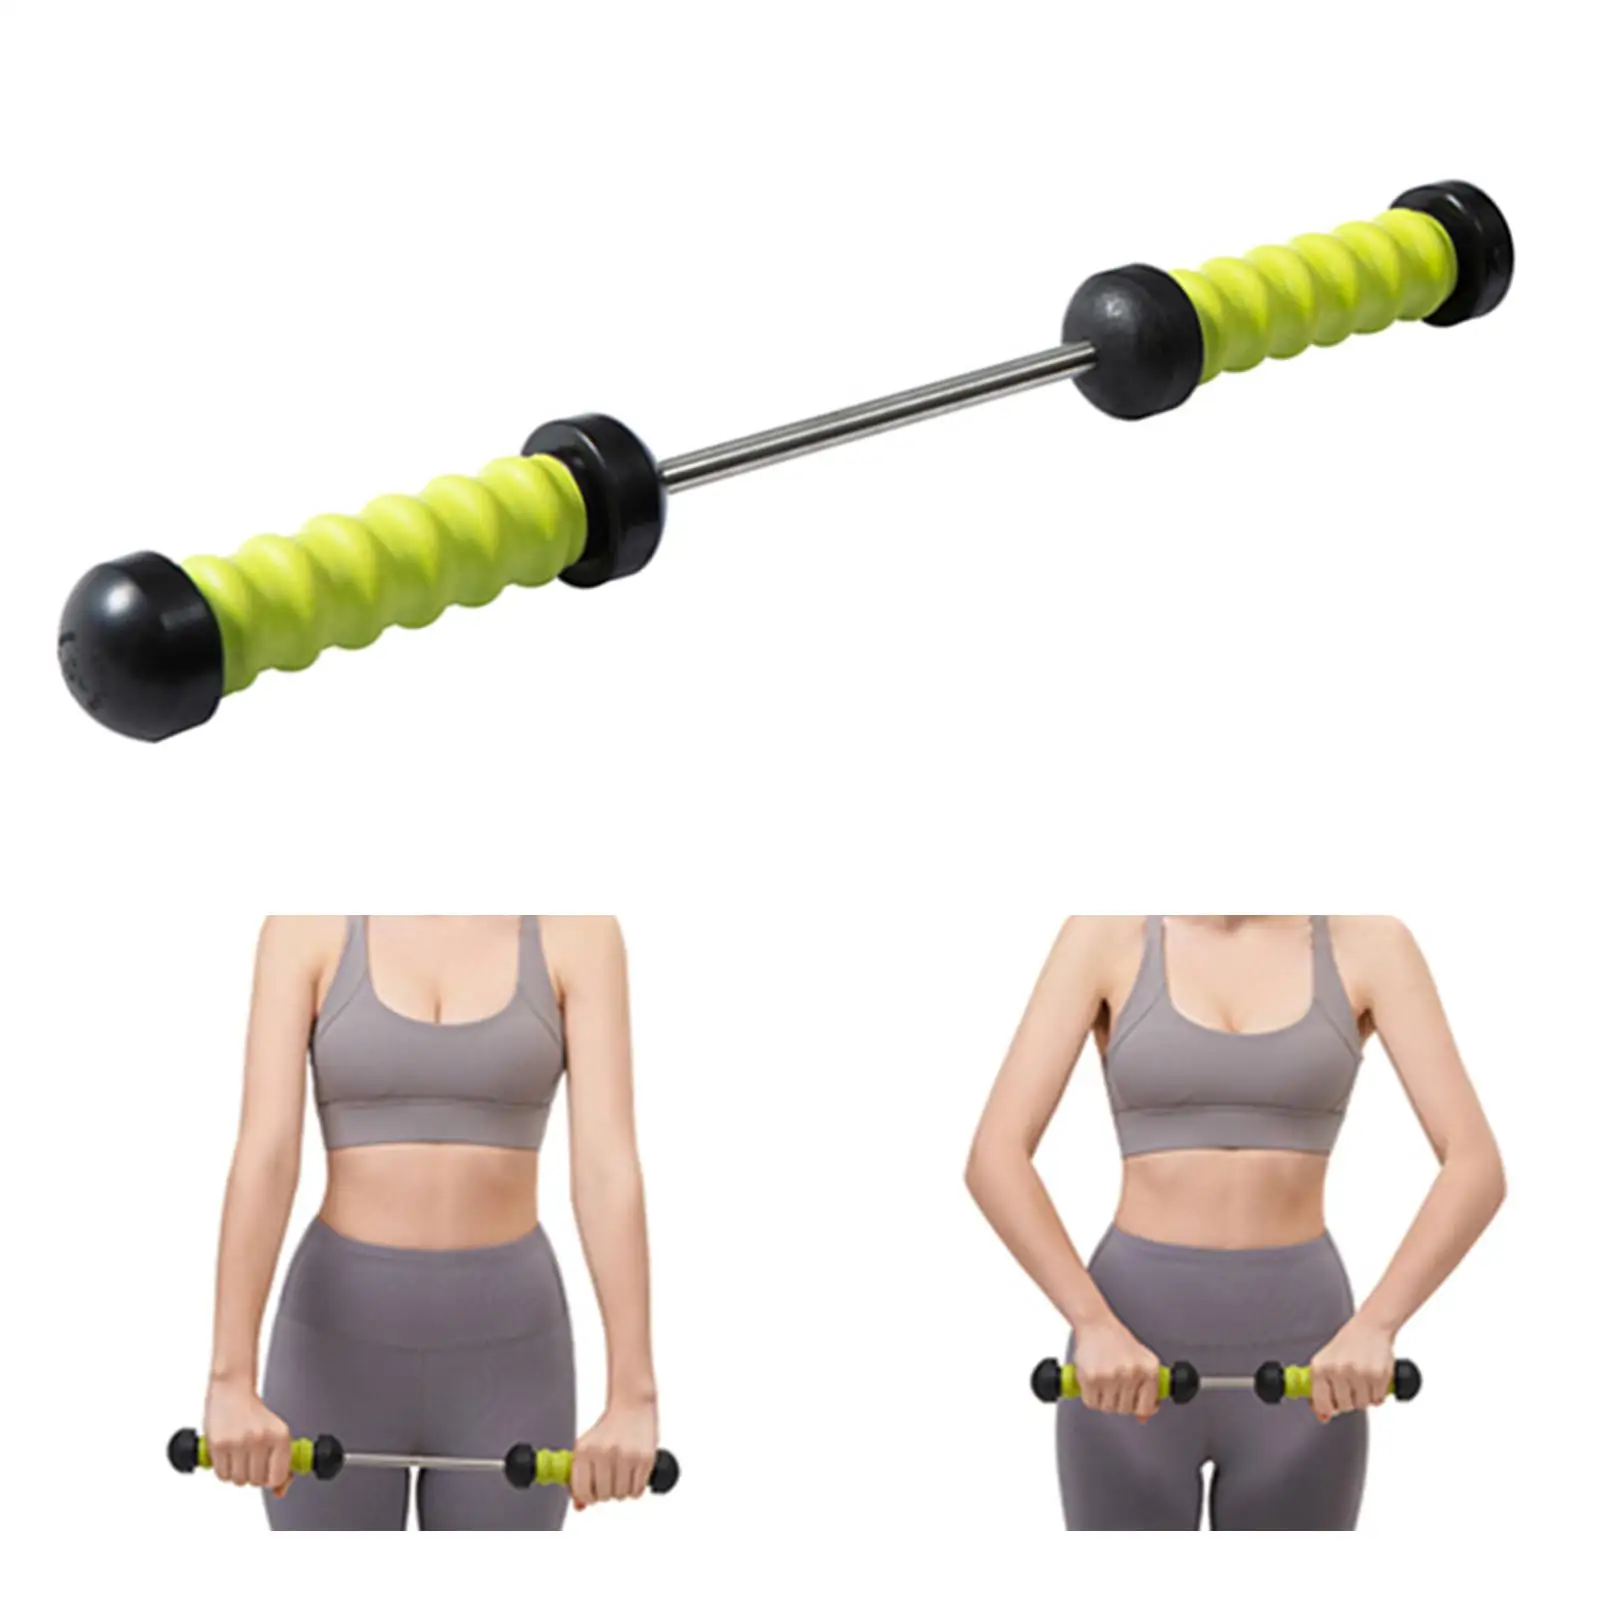 Arm Power Exerciser Muscle Training Resistance Exercise Bands for Muscle